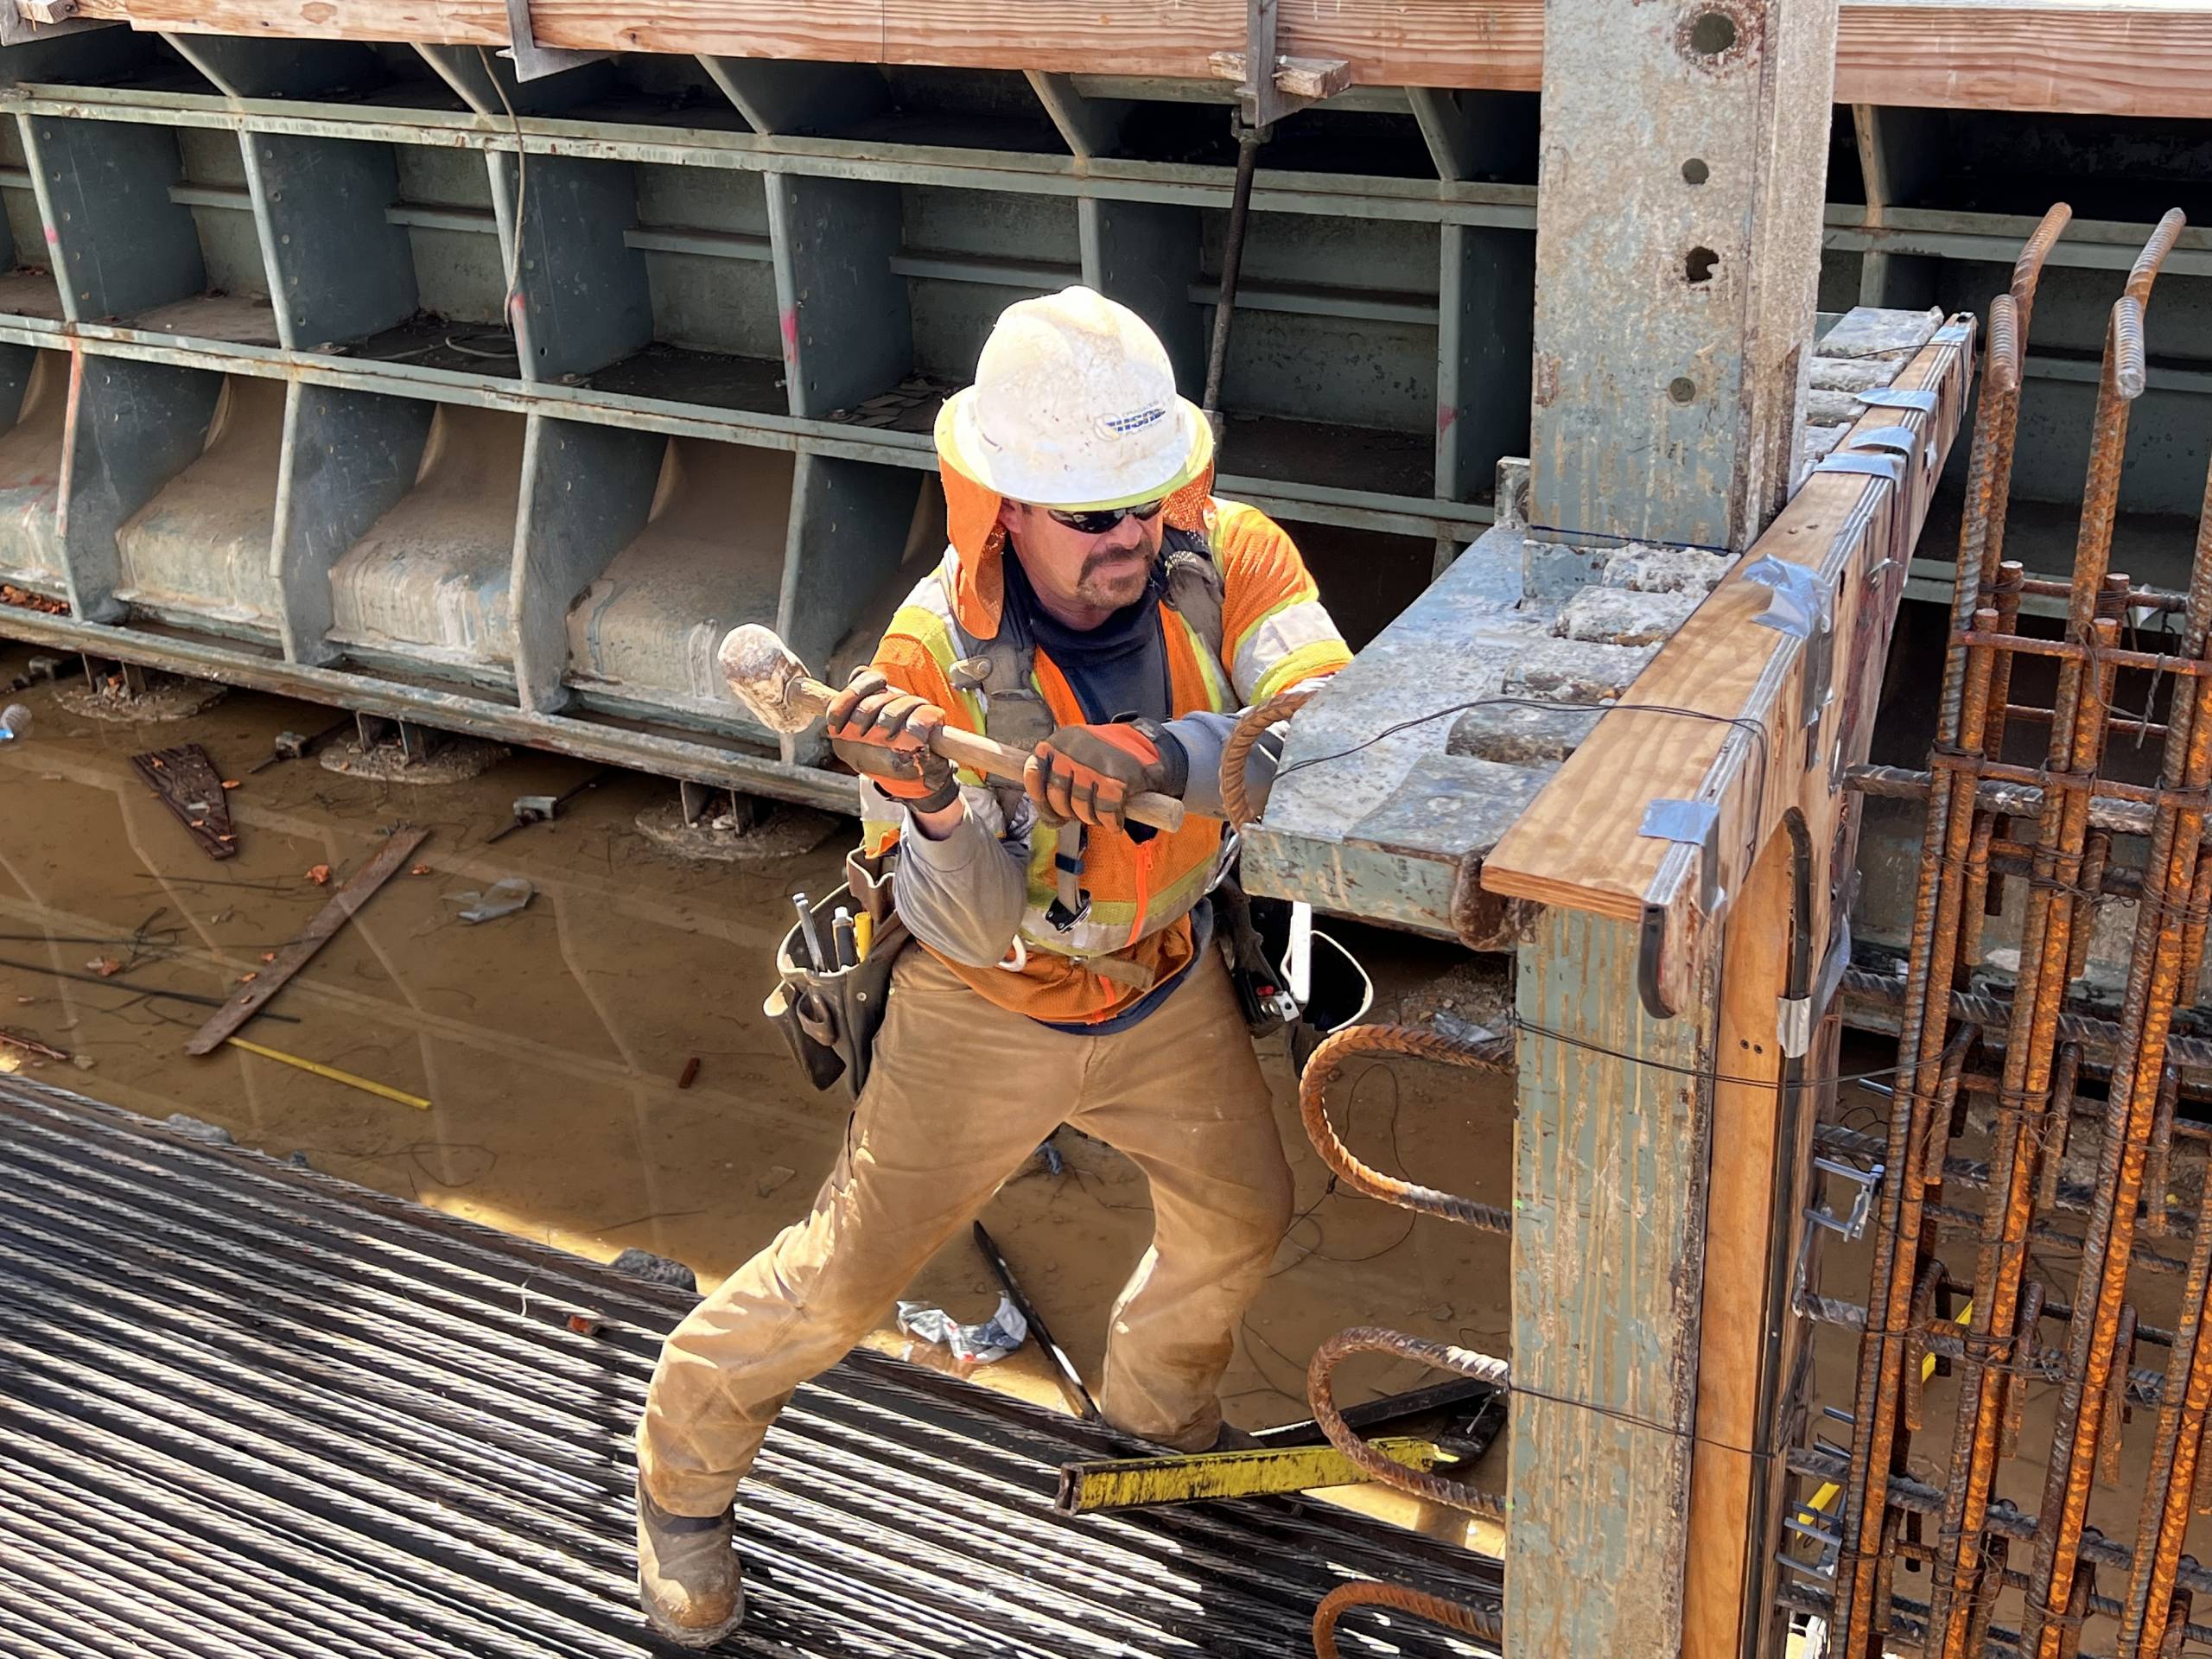 A worker in an orange vest and a white helmet is hammering a steel beam.